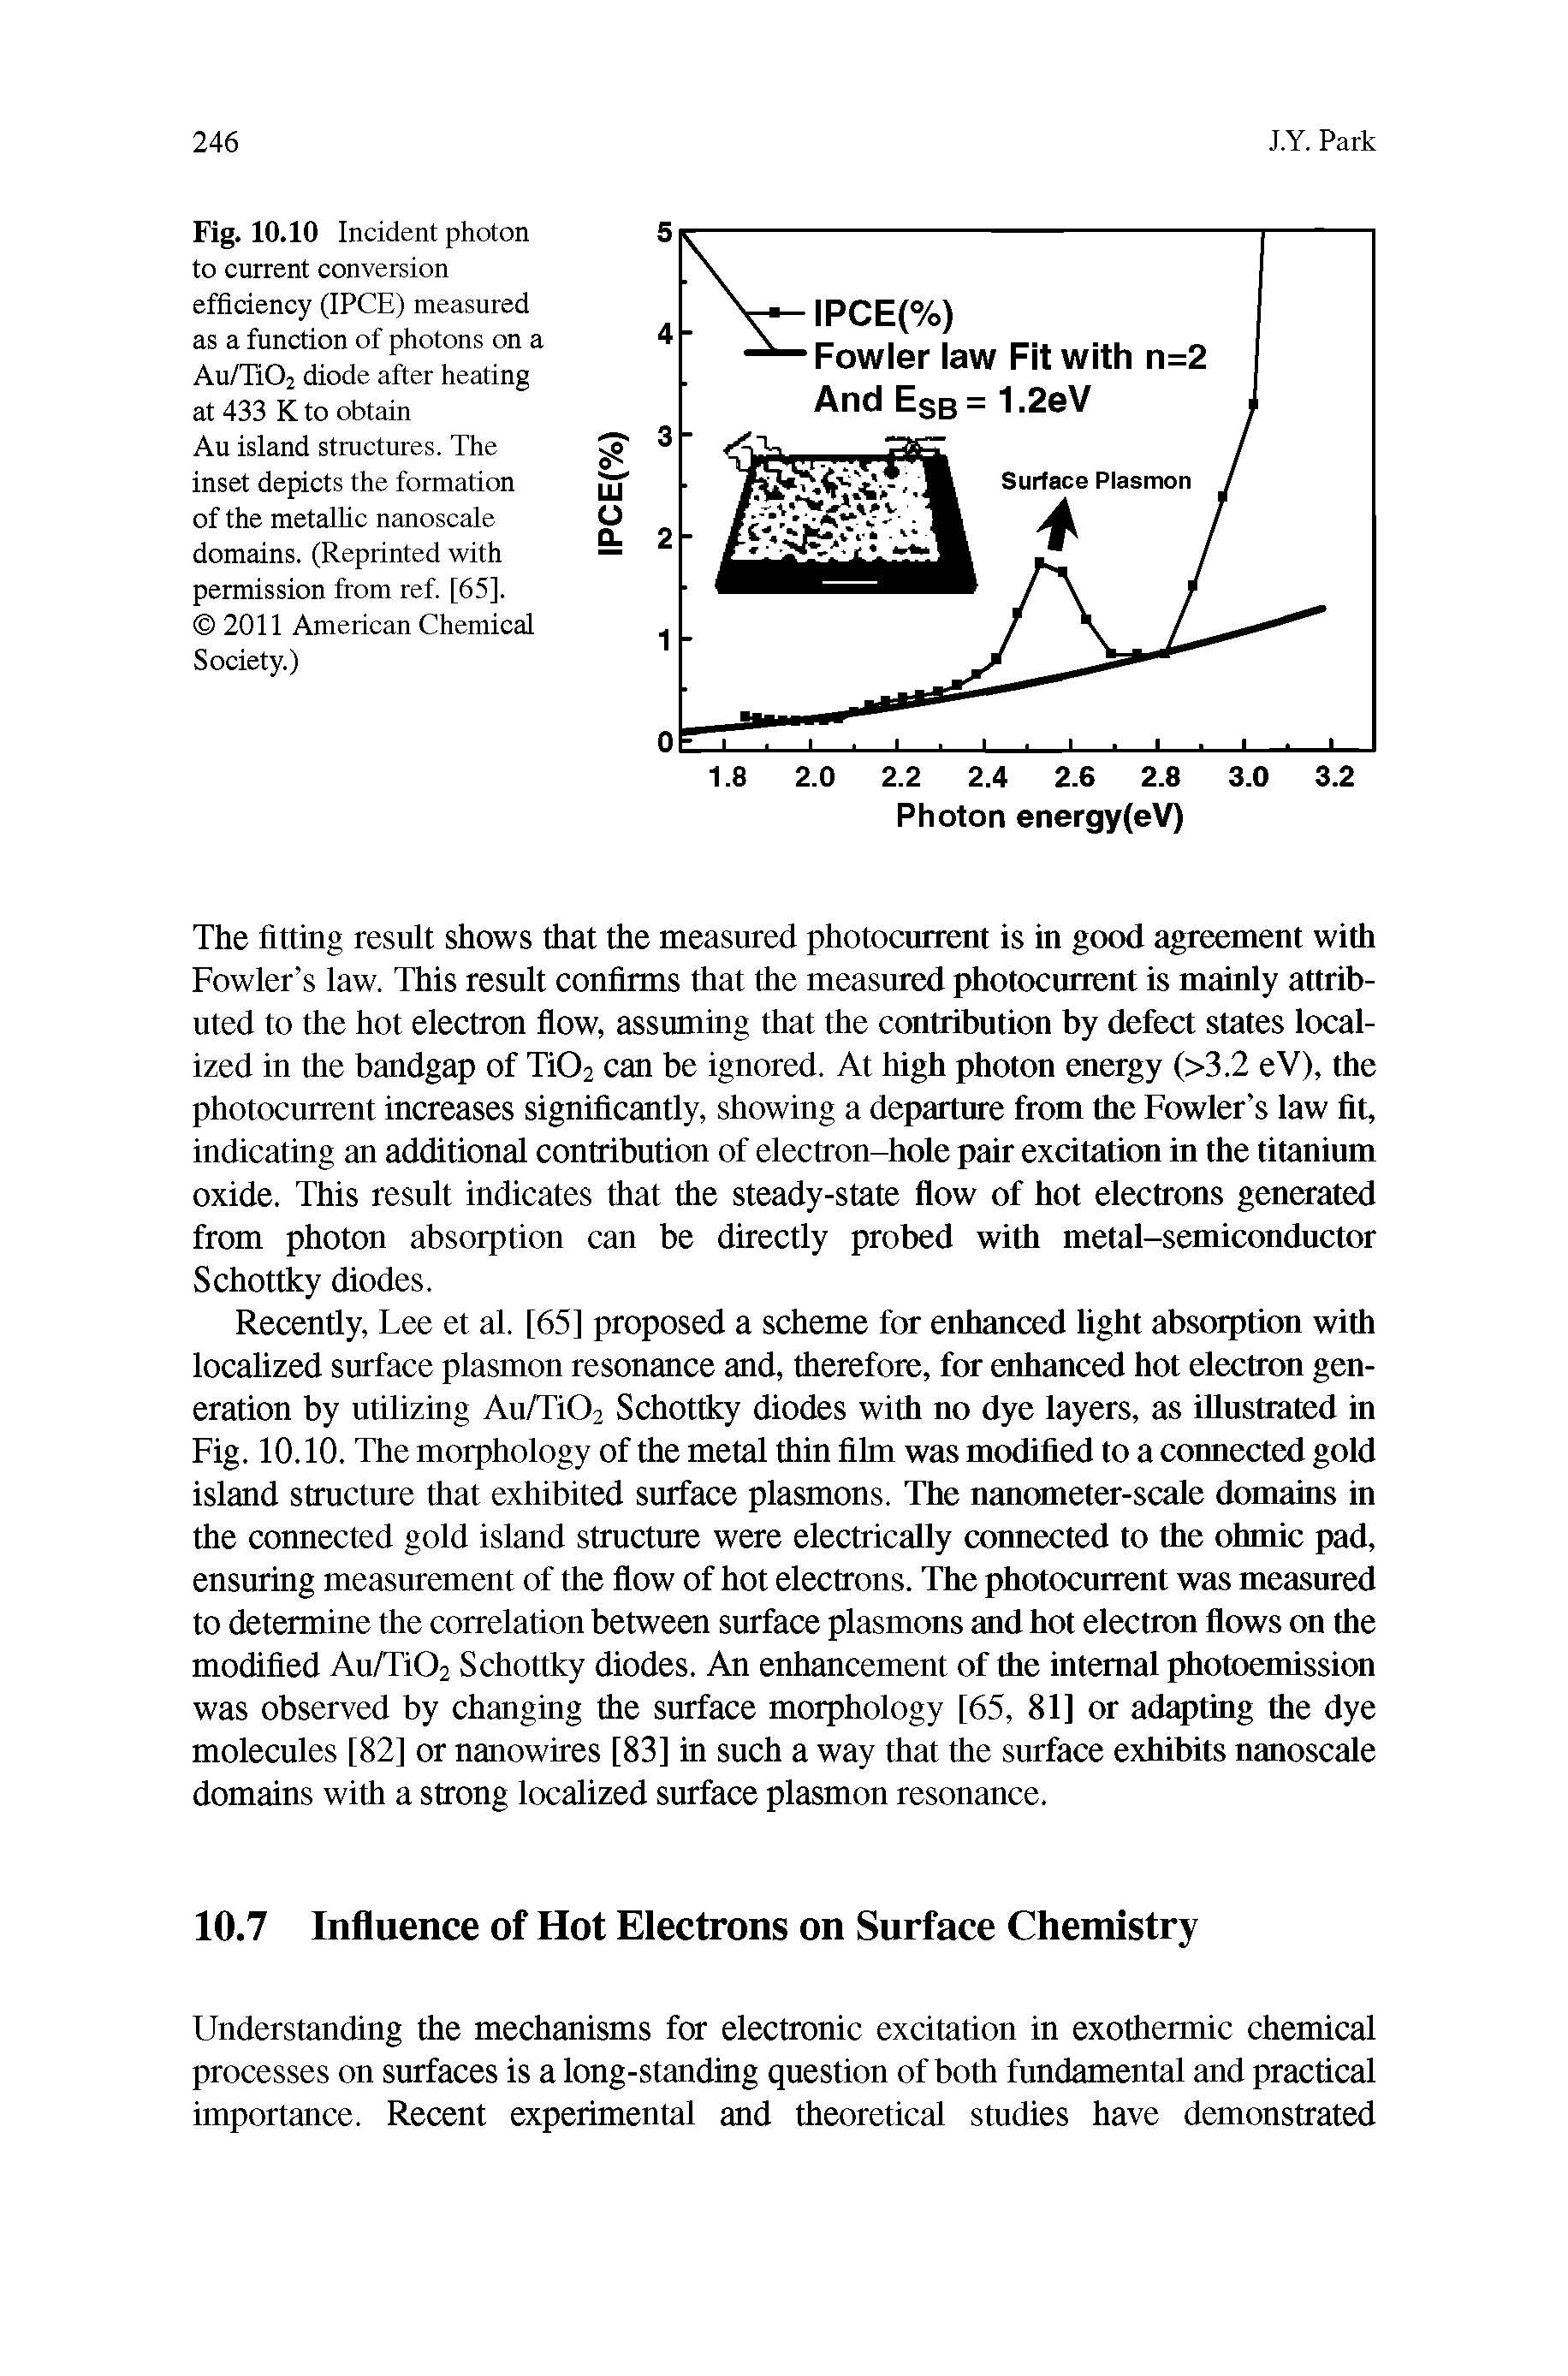 Fig. 10.10 Incident photon to current conversion efficiency (IPCE) measured as a function of photons on a Au/Ti02 diode after heating at 433 K to obtain Au island structures. The inset depicts the formation of the metalhc nanoscale domains. (Reprinted with permission from ref. [65].